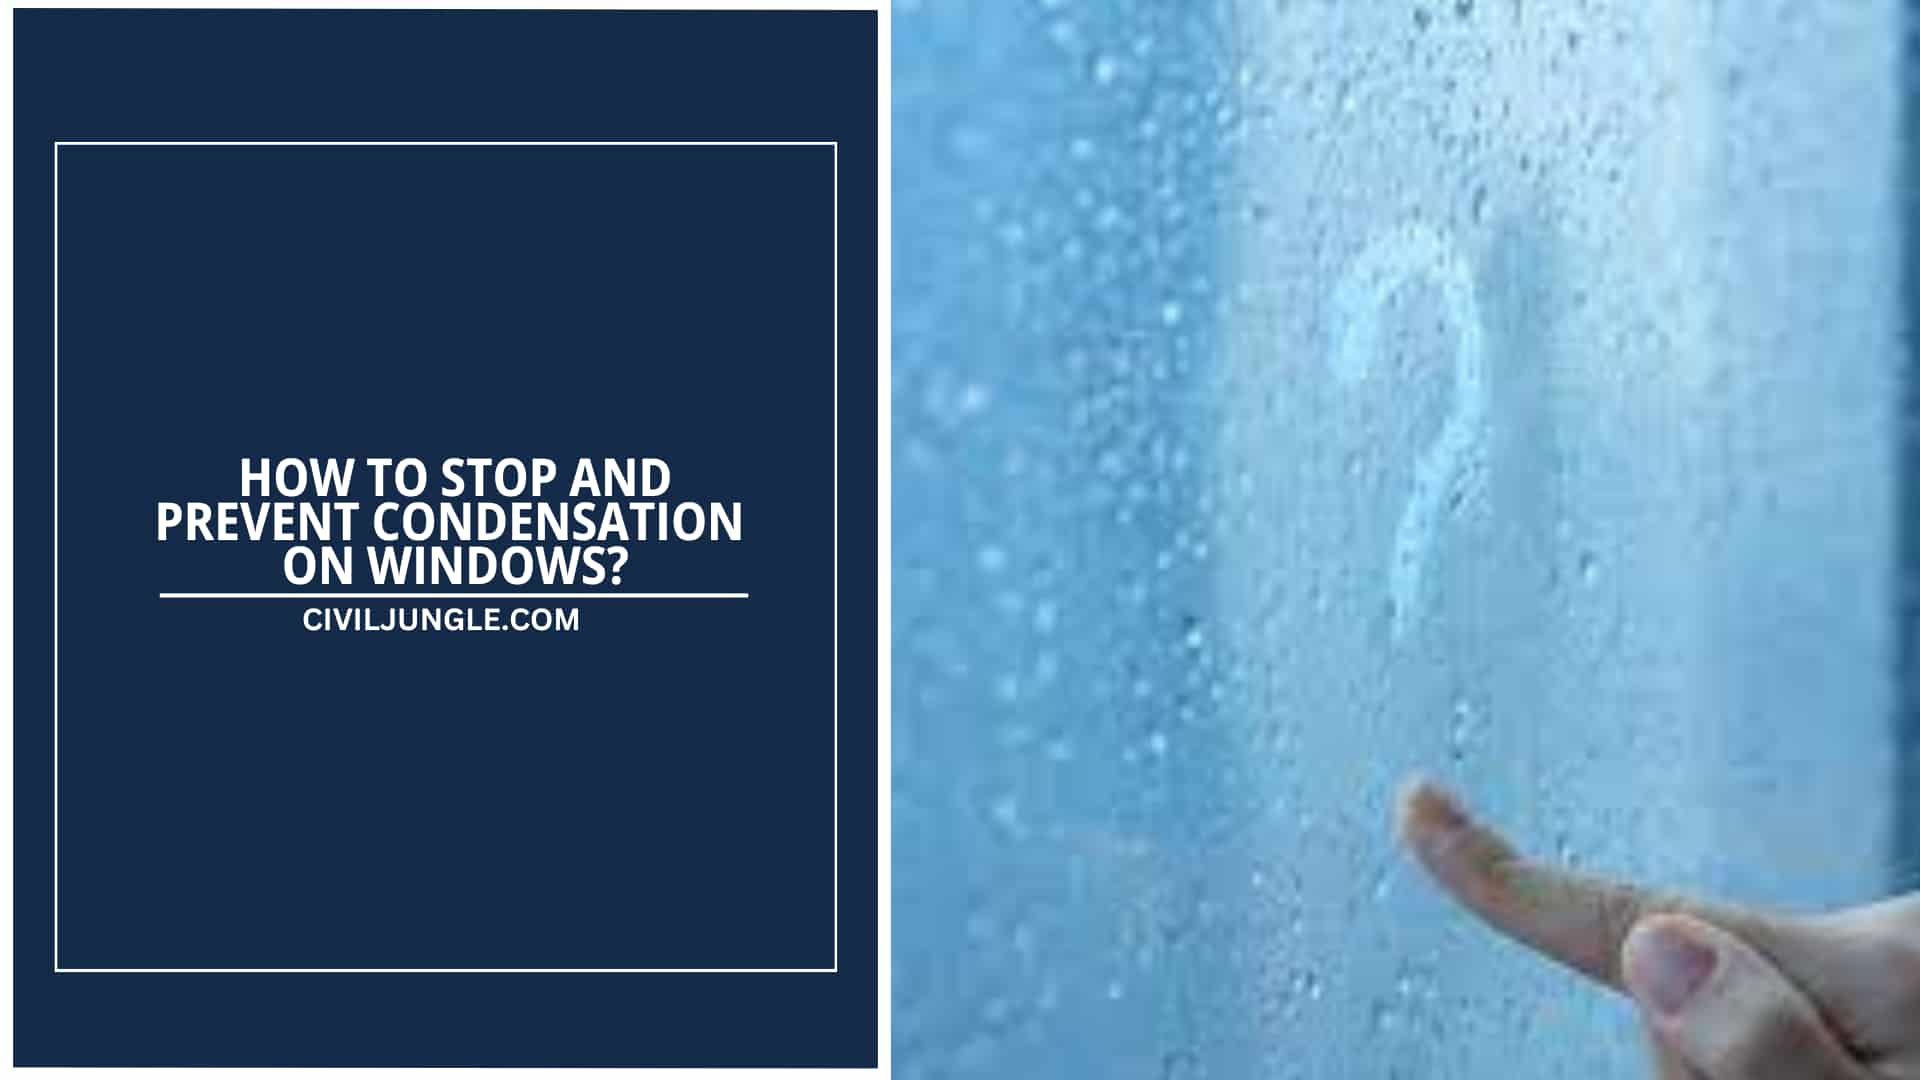 How to Stop and Prevent Condensation on Windows?